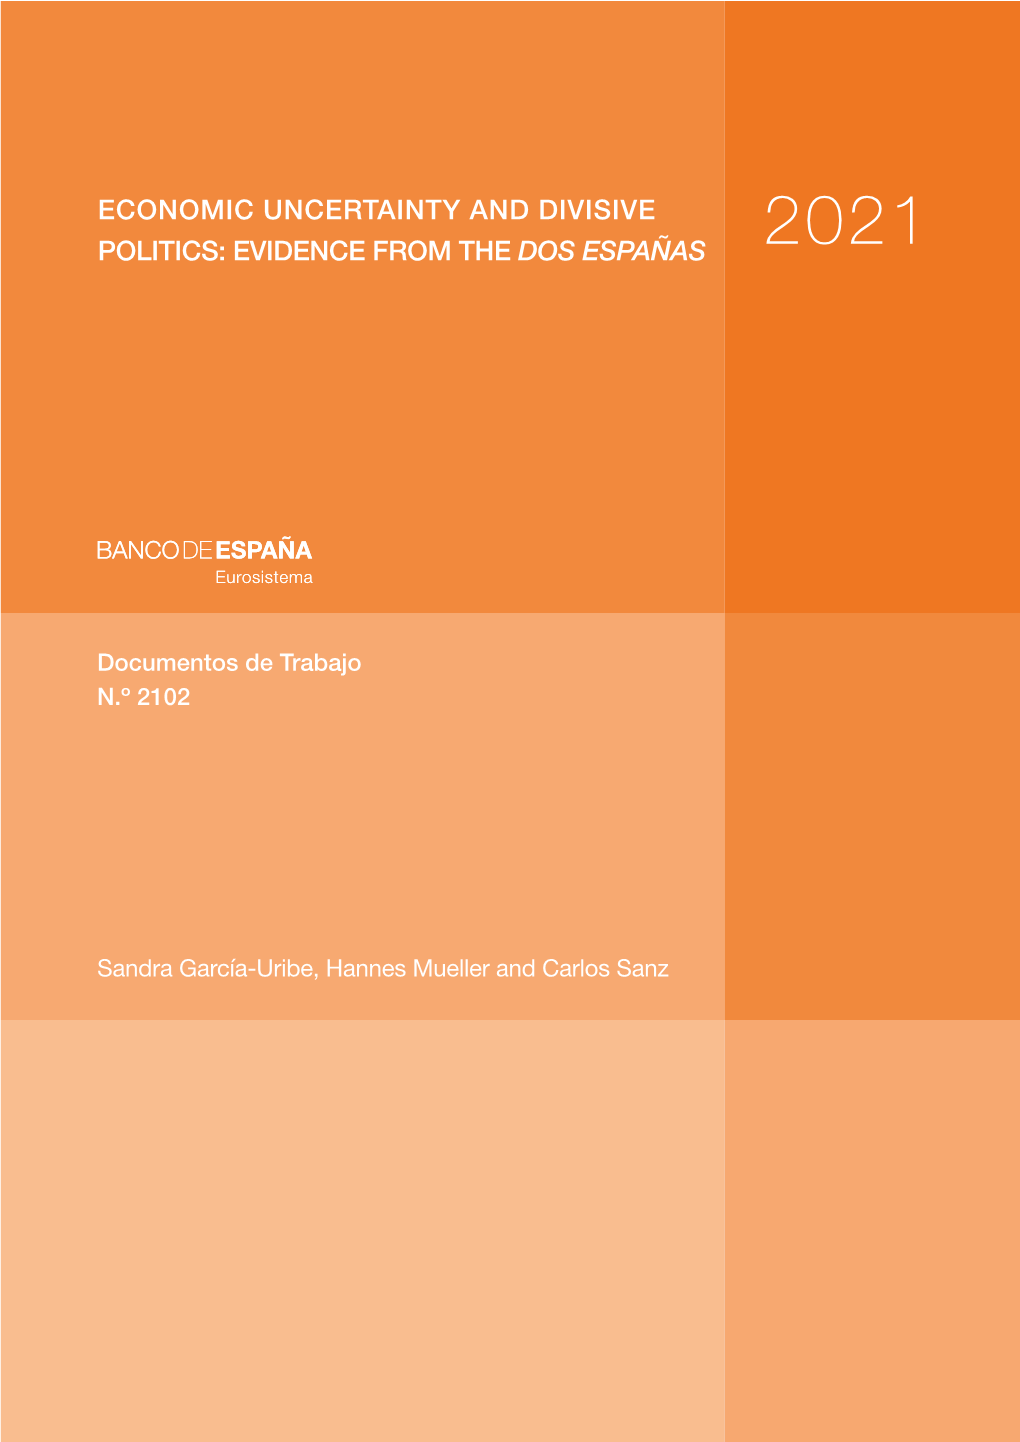 Economic Uncertainty and Divisive Politics: Evidence from the Dos Españas 2021